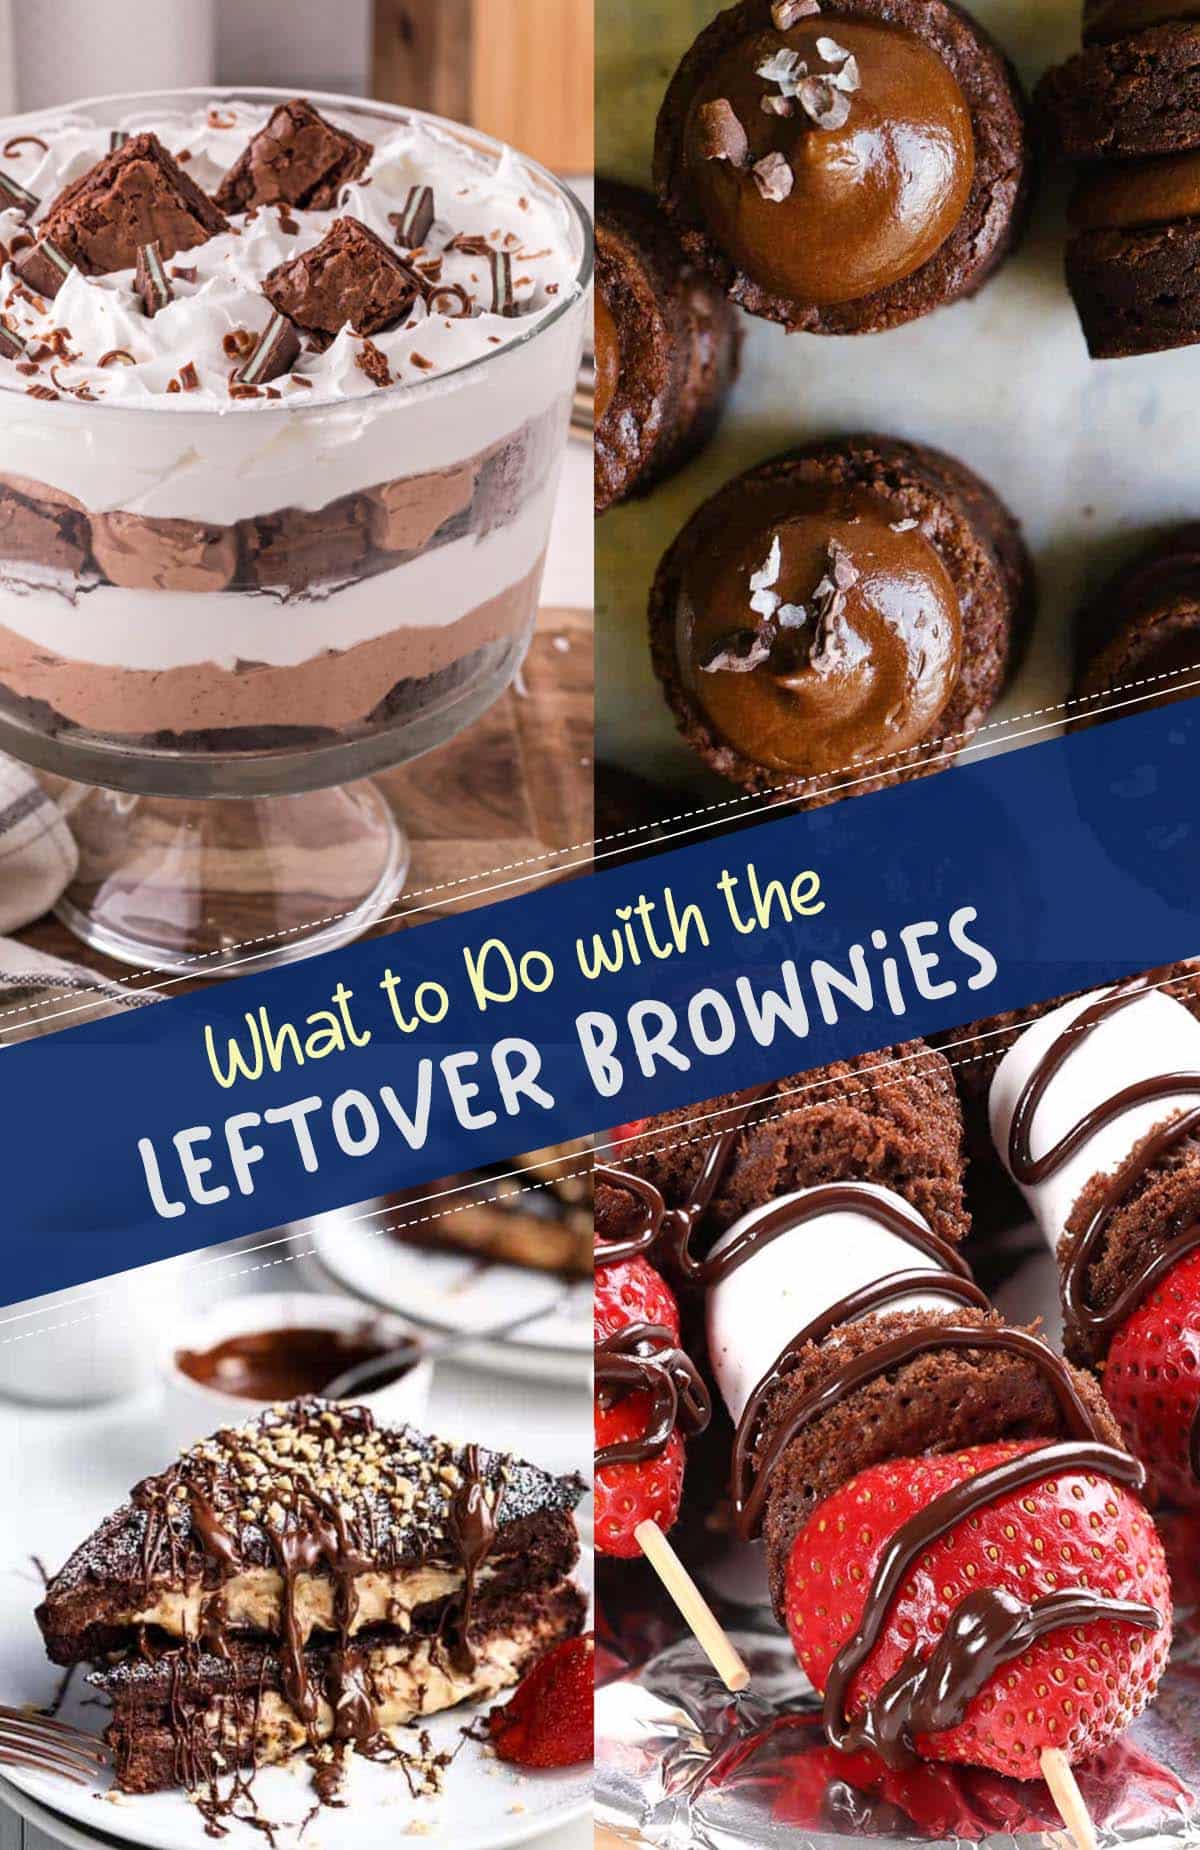 Looking for creative ways to repurpose those leftover brownies? Explore a world of delightful dessert possibilities with our innovative ideas that give new life to your favorite chocolate treat.